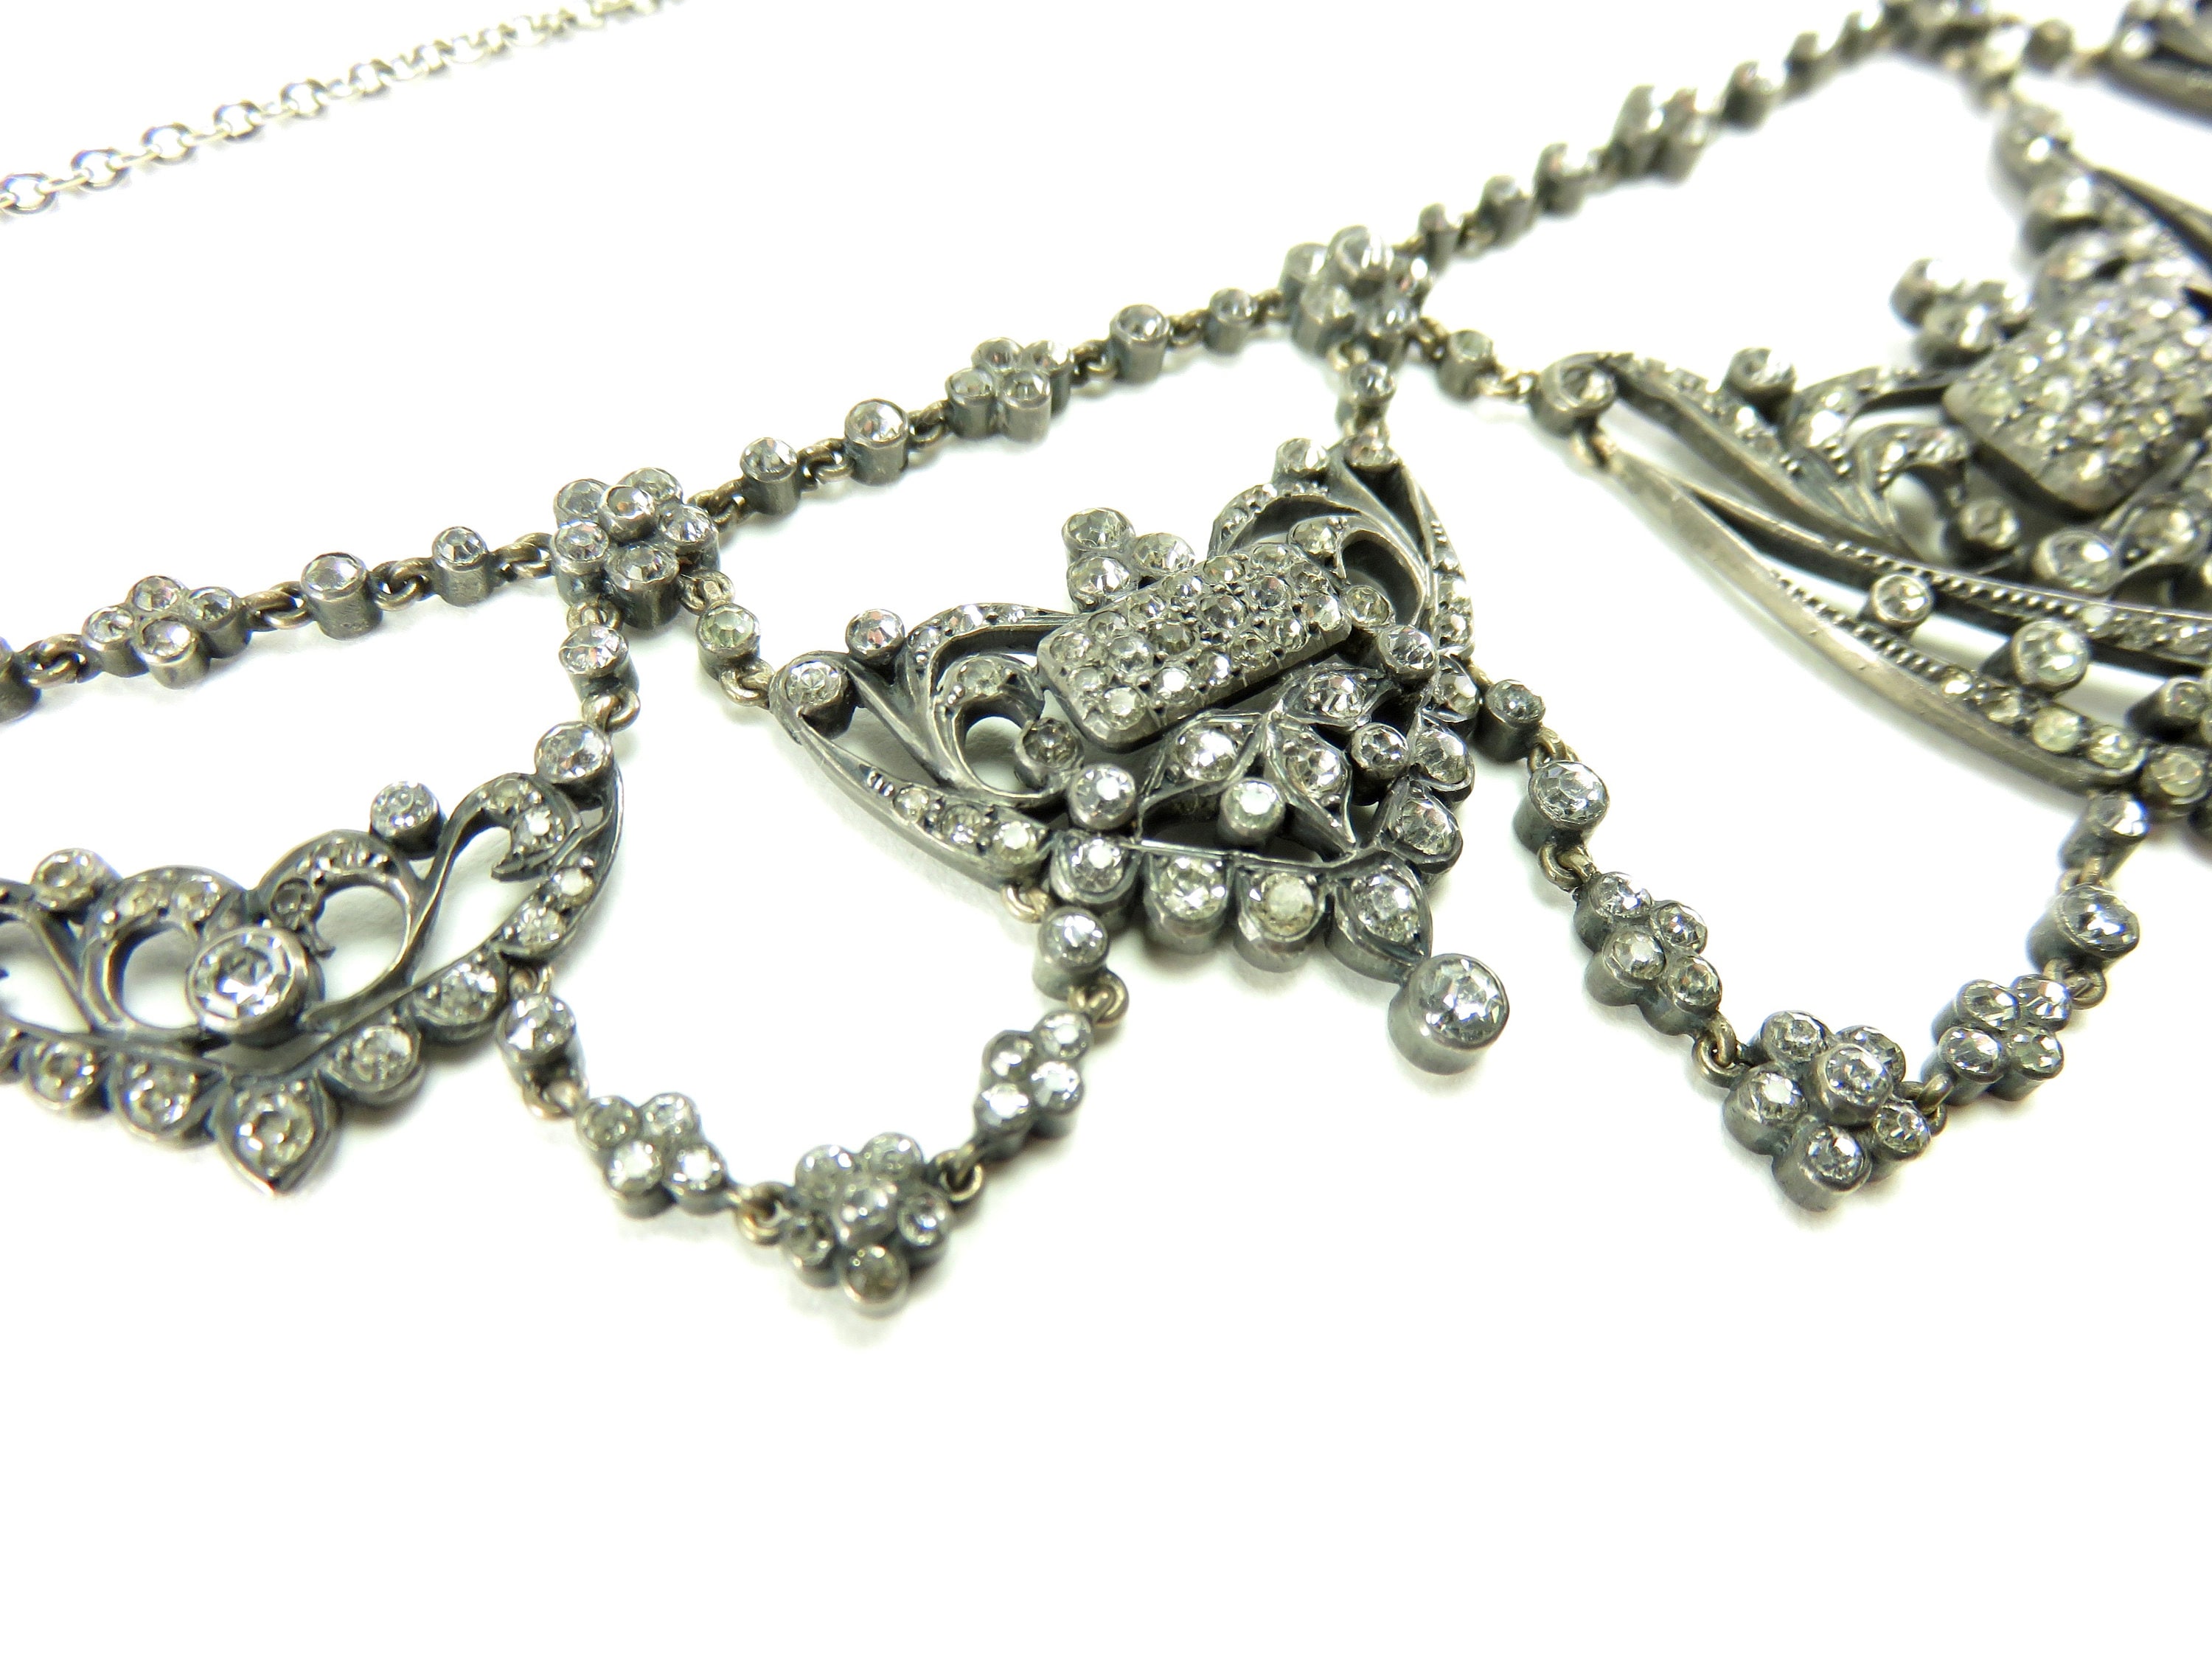 Circa 1900. Silver and Paste Stone Necklace - Etsy